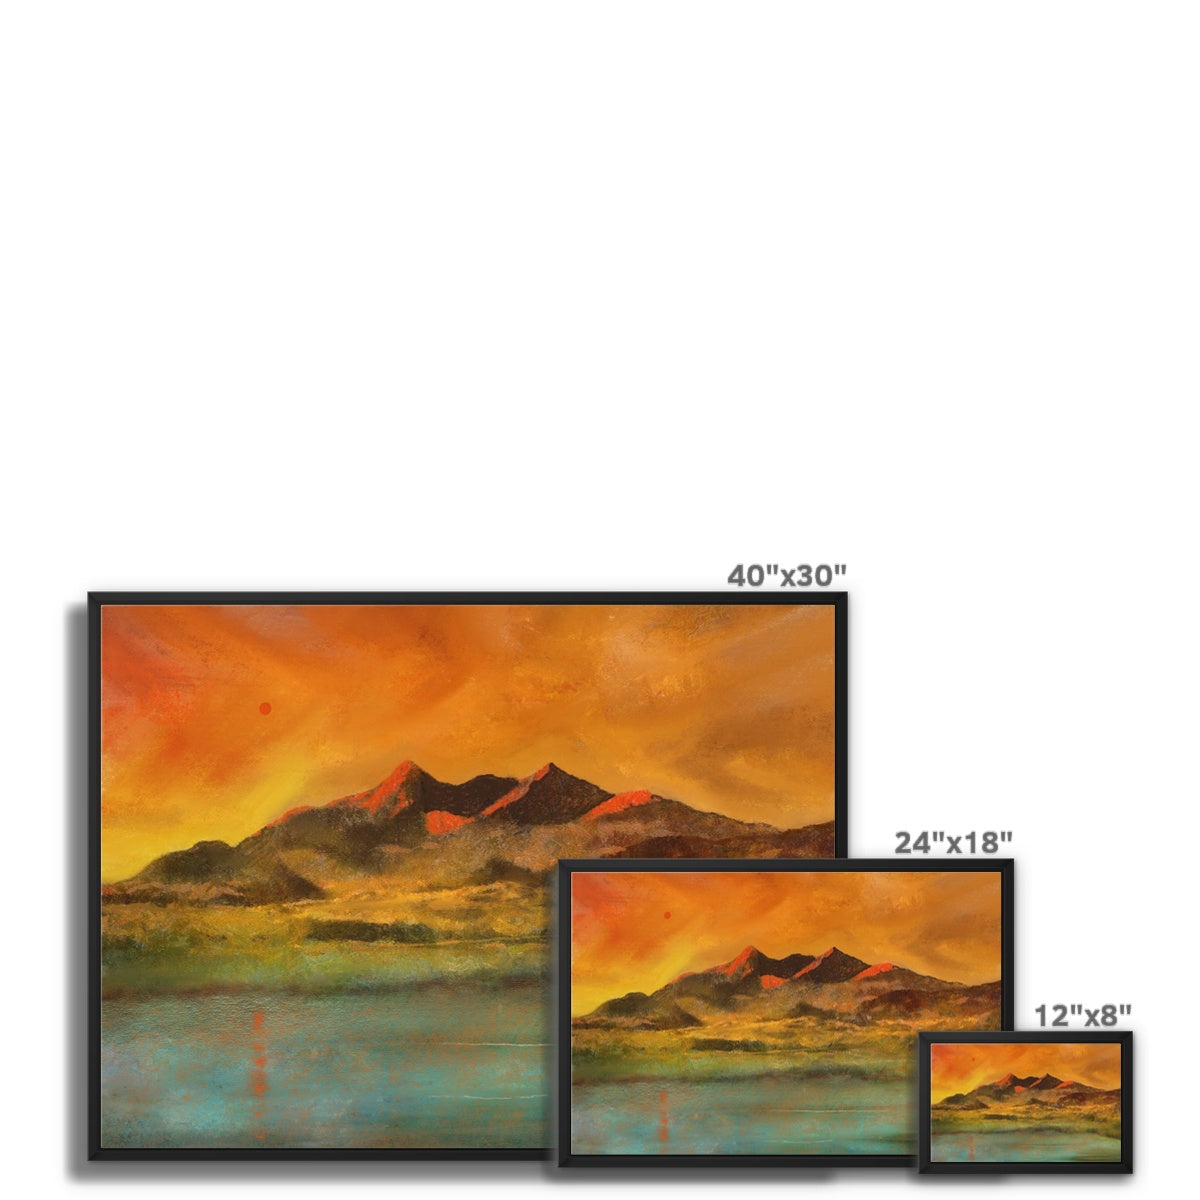 Skye Red Moon Cuillin Painting | Framed Canvas From Scotland-Floating Framed Canvas Prints-Skye Art Gallery-Paintings, Prints, Homeware, Art Gifts From Scotland By Scottish Artist Kevin Hunter